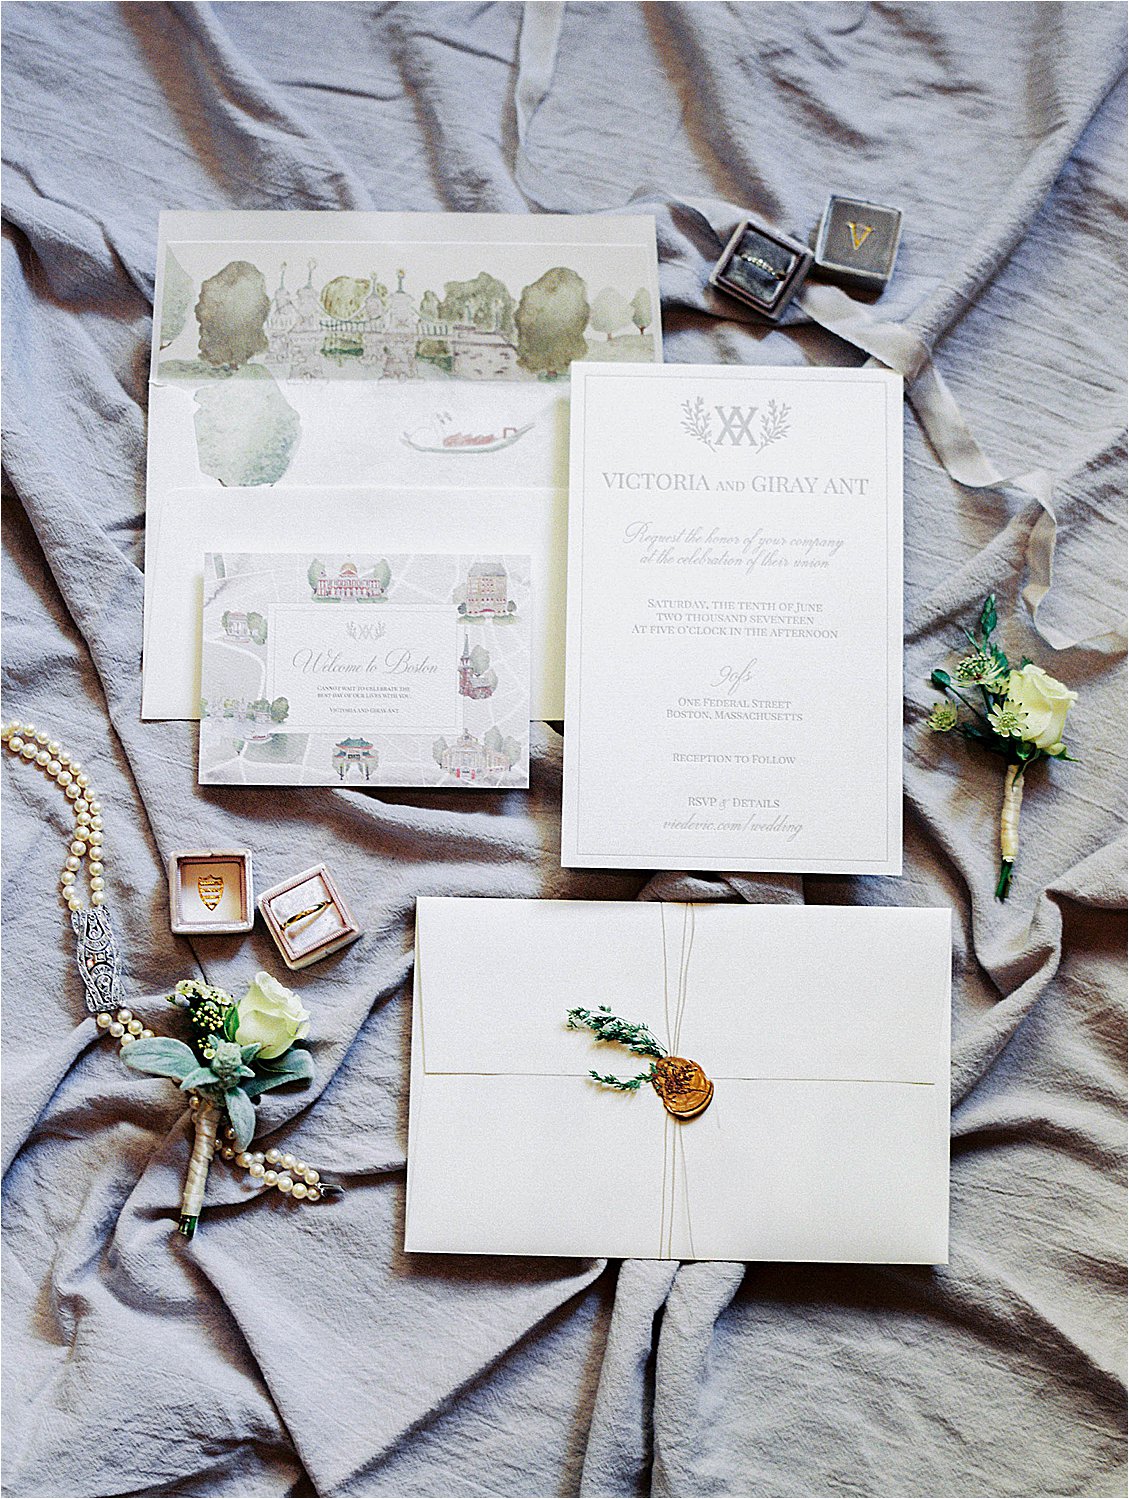 2019 Publications - A Year in Review with Florida and DC Film Wedding Photographer Renee Hollingshead as seen in Martha Stewart Weddings - the prettiest vintage invitations by Vie De Vic in Boston, Massachusetts